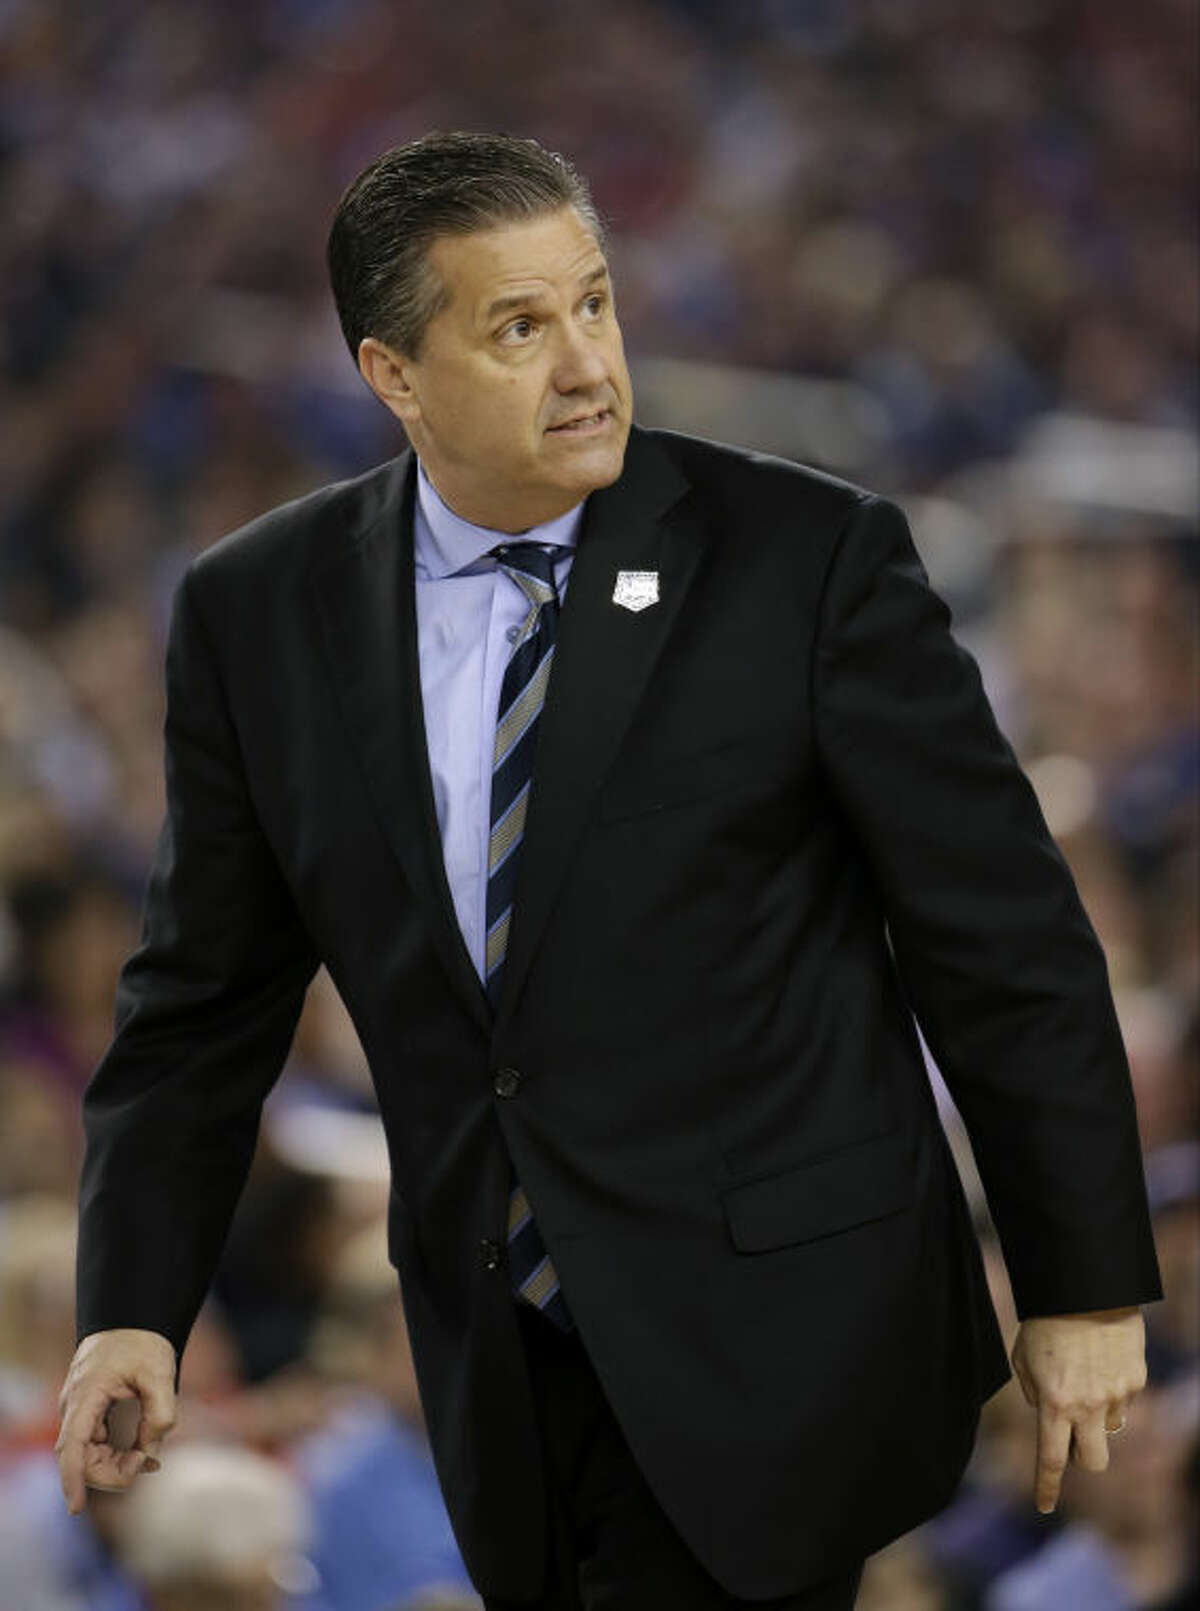 Kentucky head coach John Calipari looks on during the first half of the NCAA Final Four tournament college basketball championship game against Connecticut Monday, April 7, 2014, in Arlington, Texas. (AP Photo/David J. Phillip)